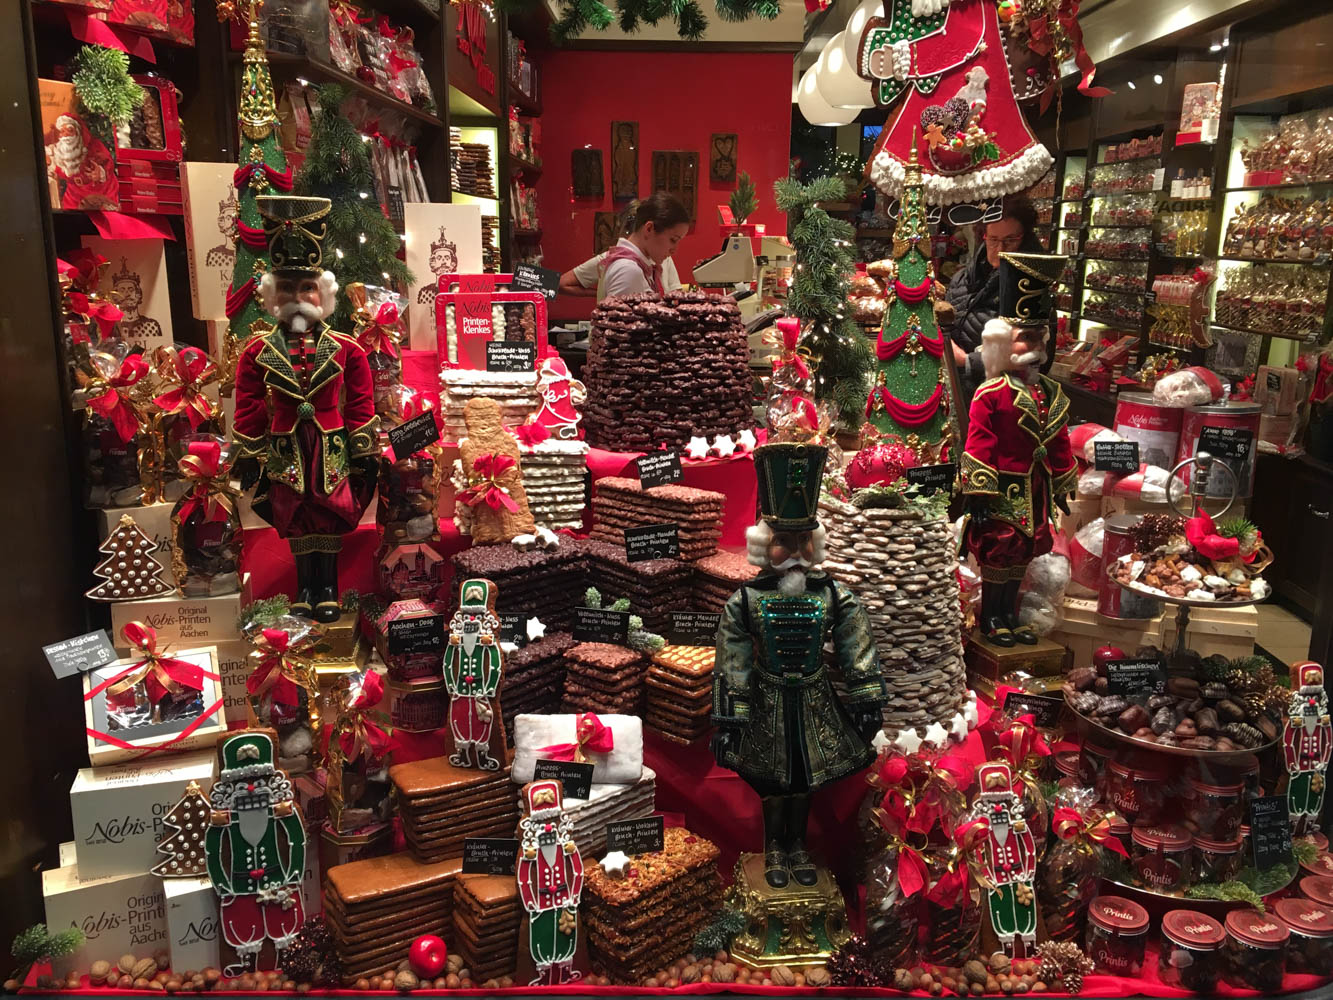 This is what Christmas looks like in a shop in Germany